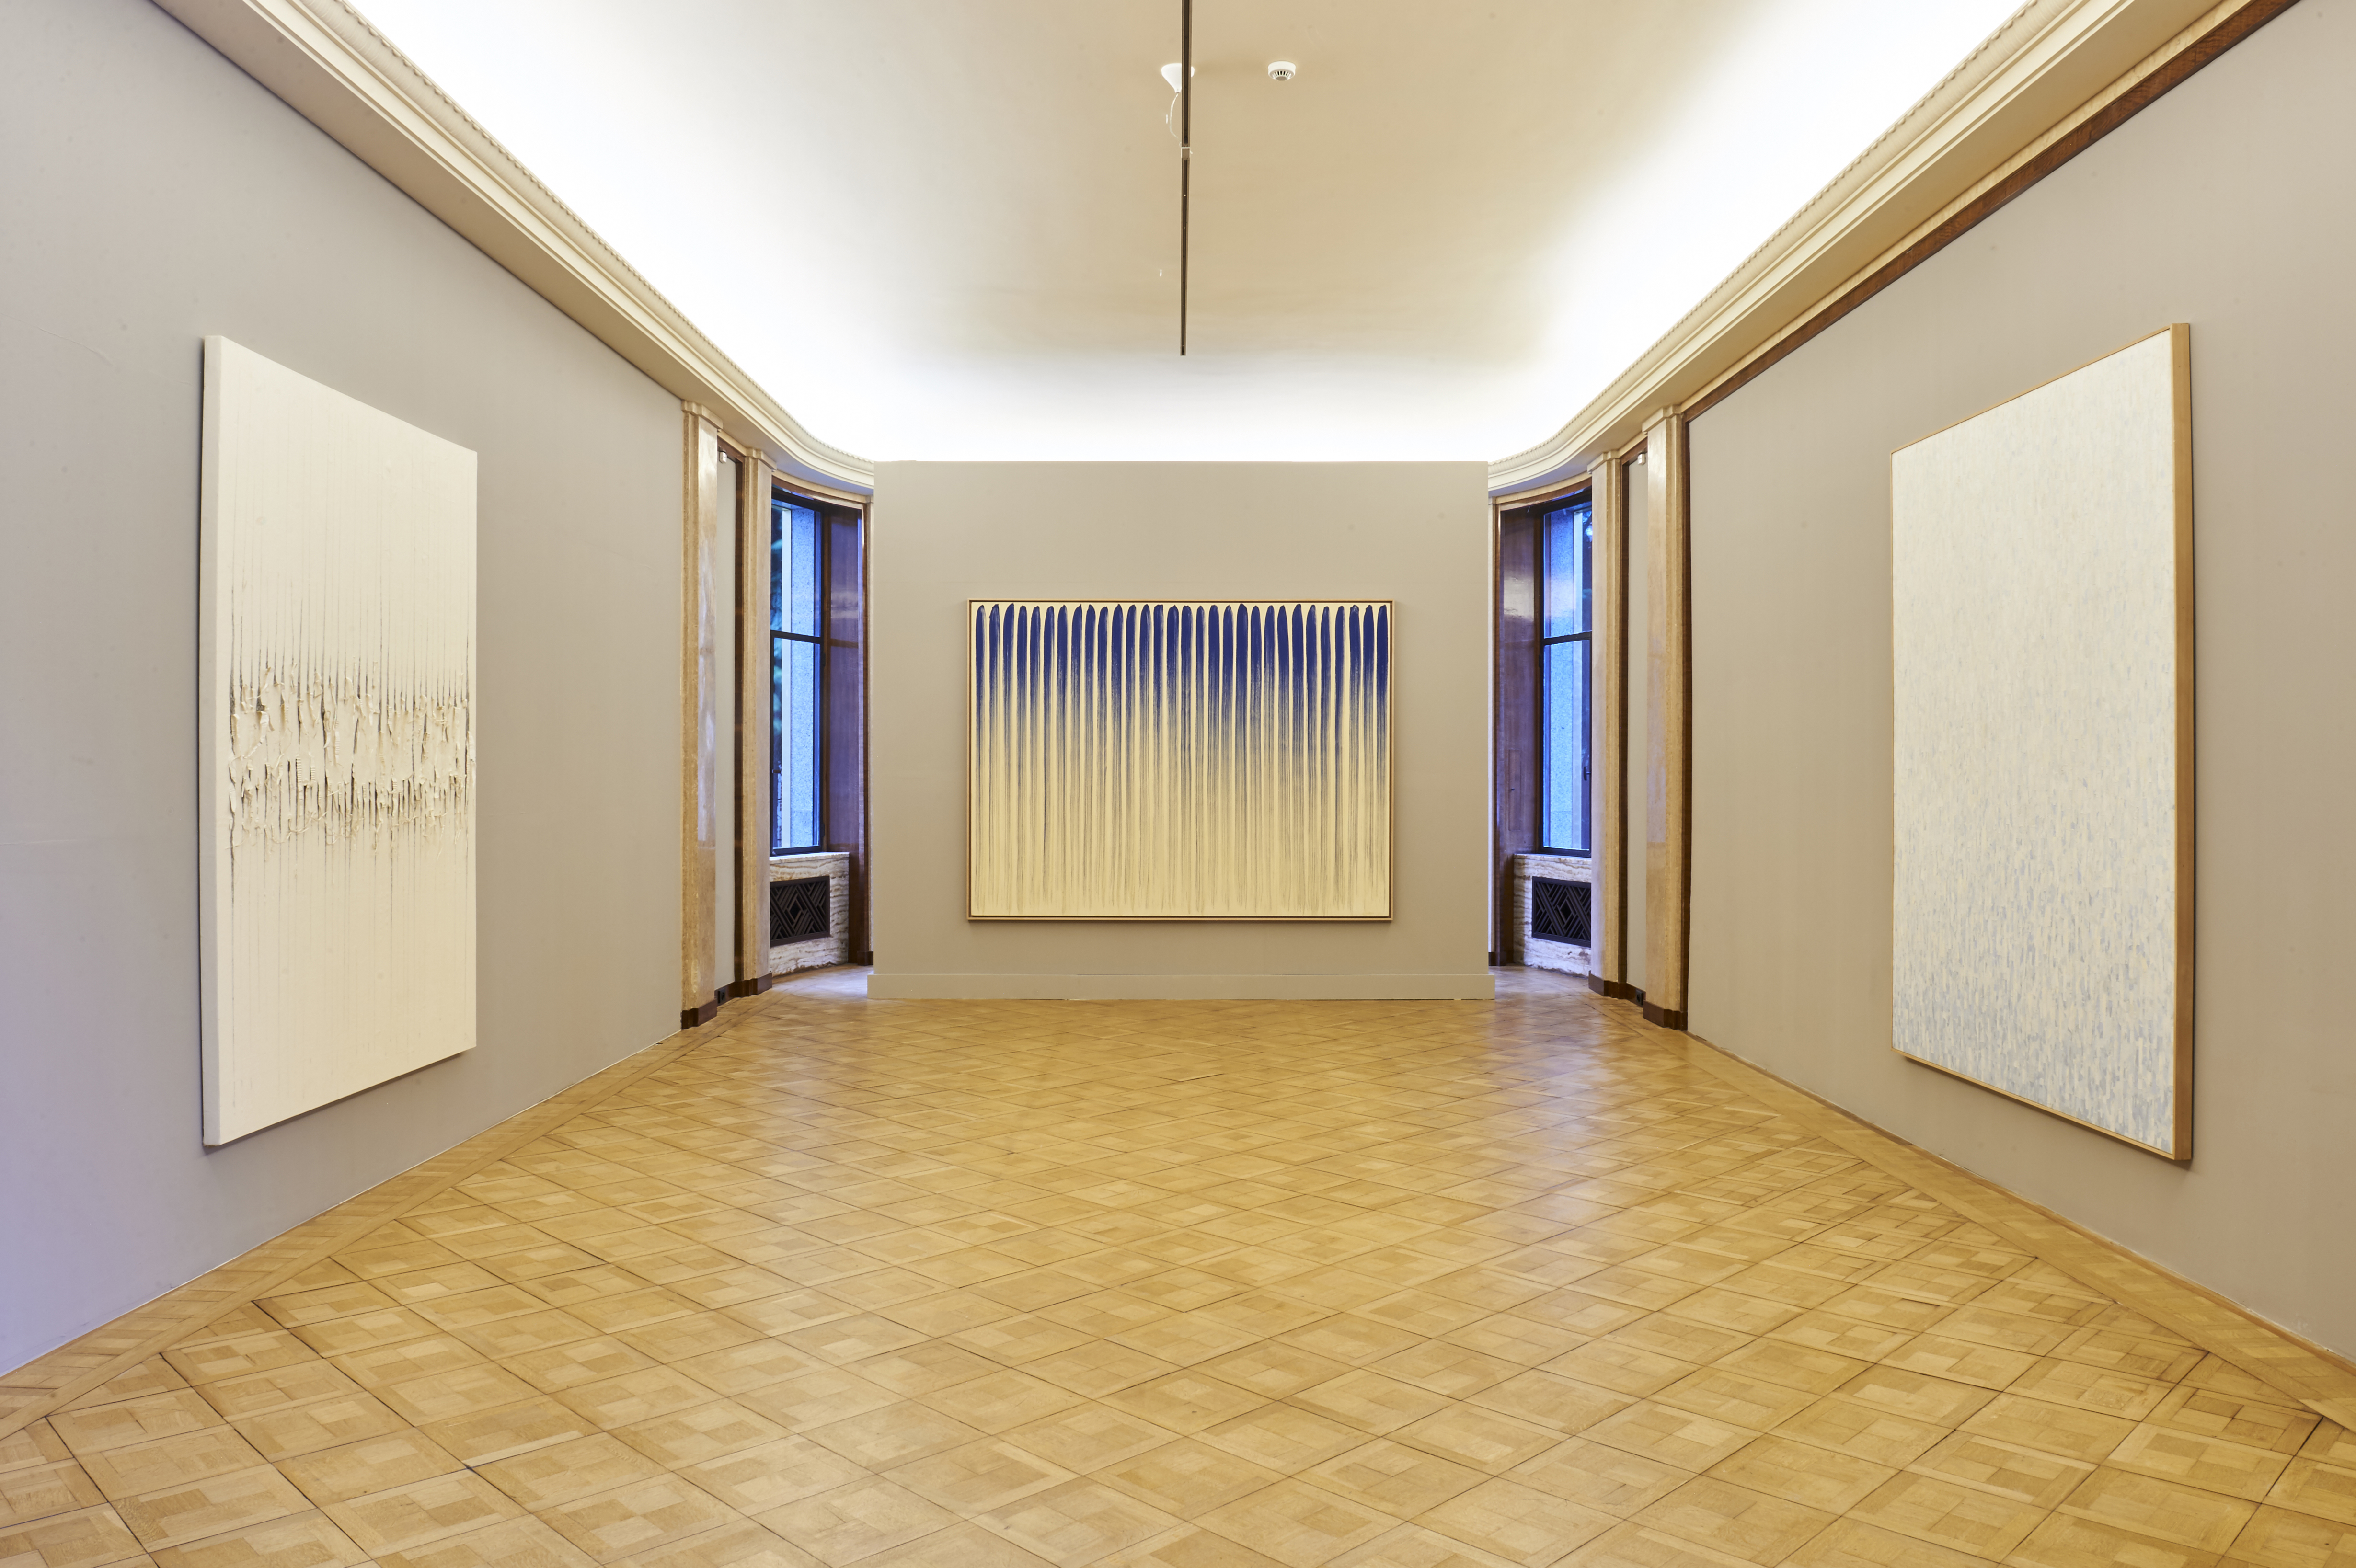 Installation View of When Process becomes Form:
Dansaekhwa and Korean abstraction
2016
Copyright Boghossian Foundation – Villa Empain
Image provided by Kukje Gallery